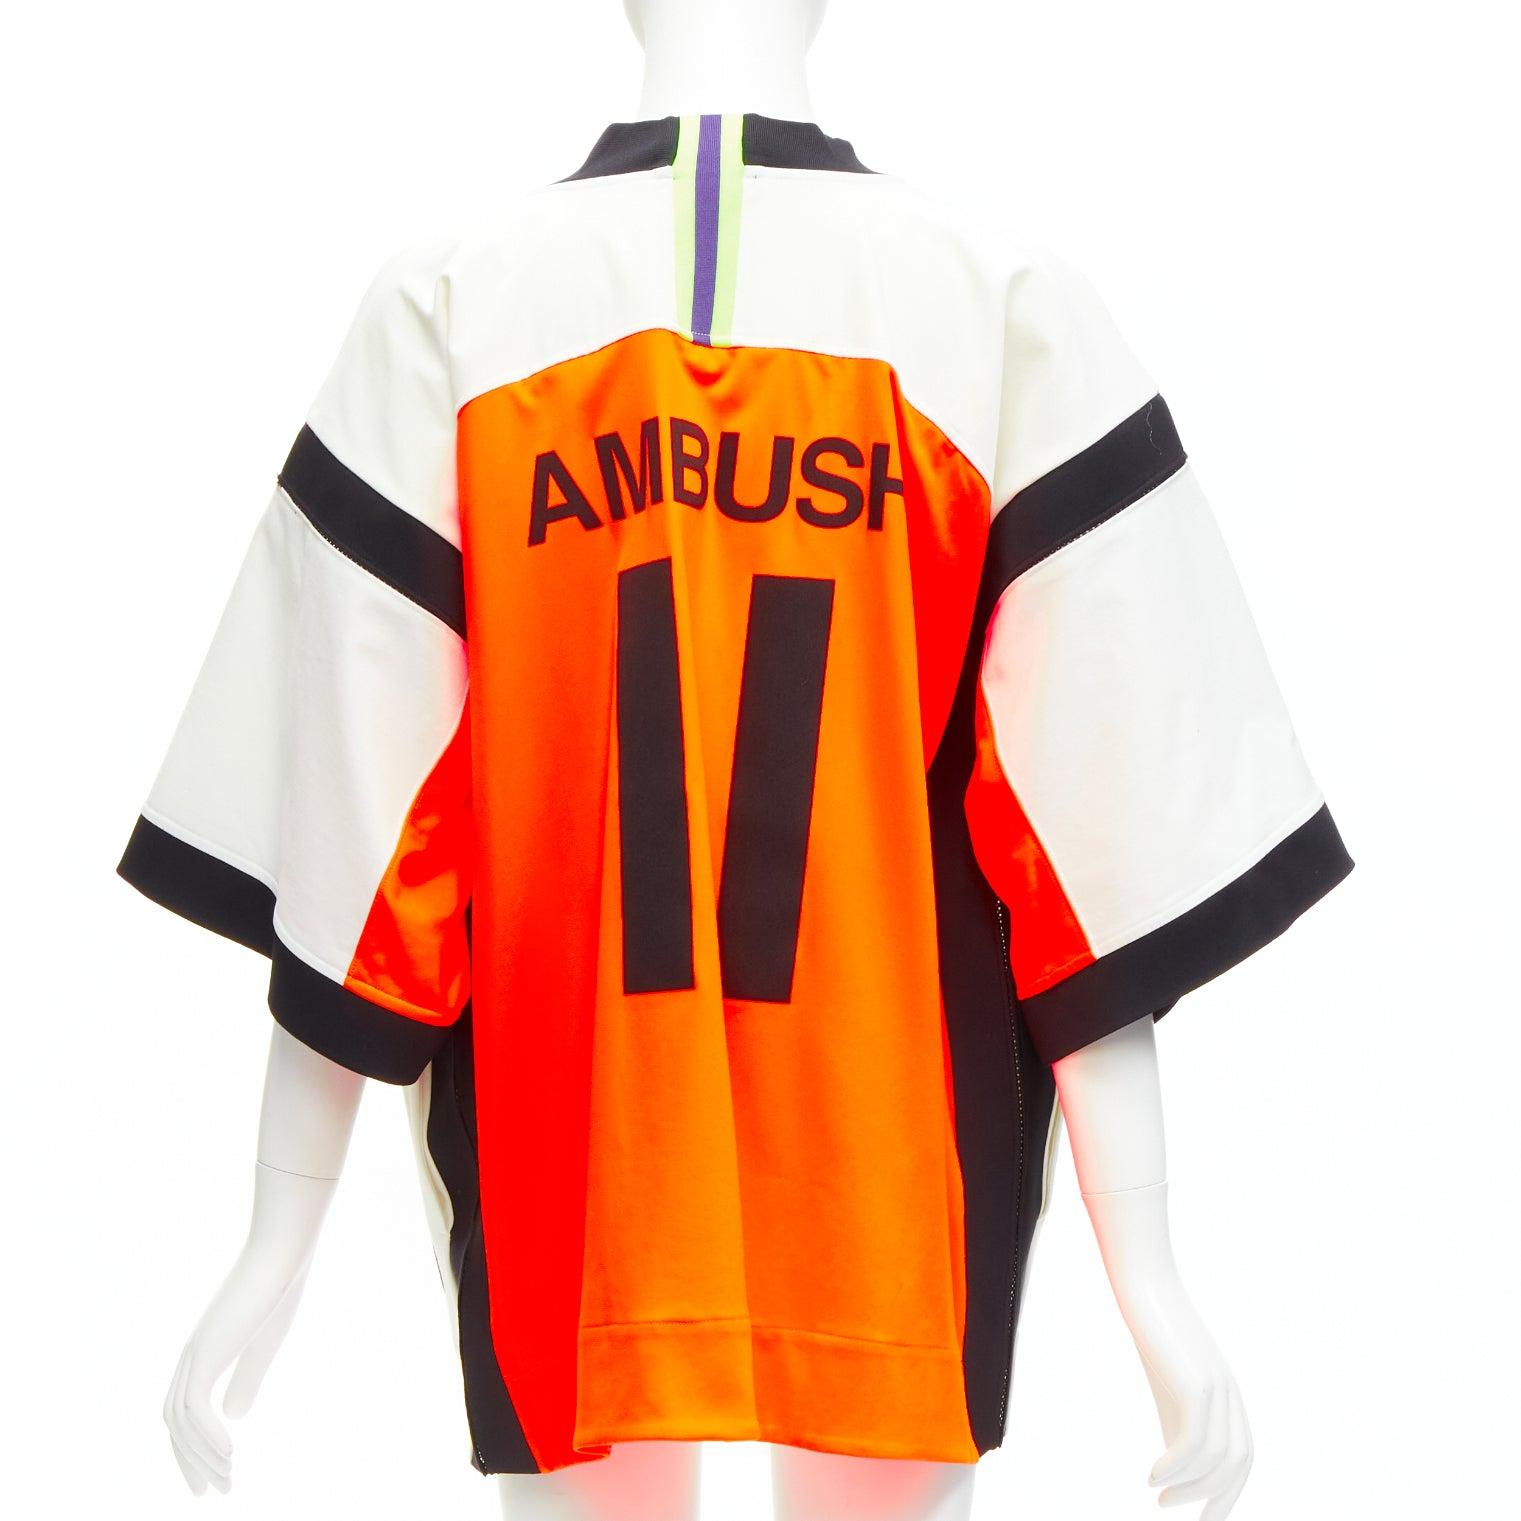 AMBUSh NIKE LAB 2019 neon orange white logo badge kimono sleeve football jersey jacket XS
Reference: BSHW/A00006
Brand: Ambush
Collection: Nike Lab 2019
Material: Cotton, Blend
Color: White, Multicolour
Pattern: Solid
Extra Details: The Nike x